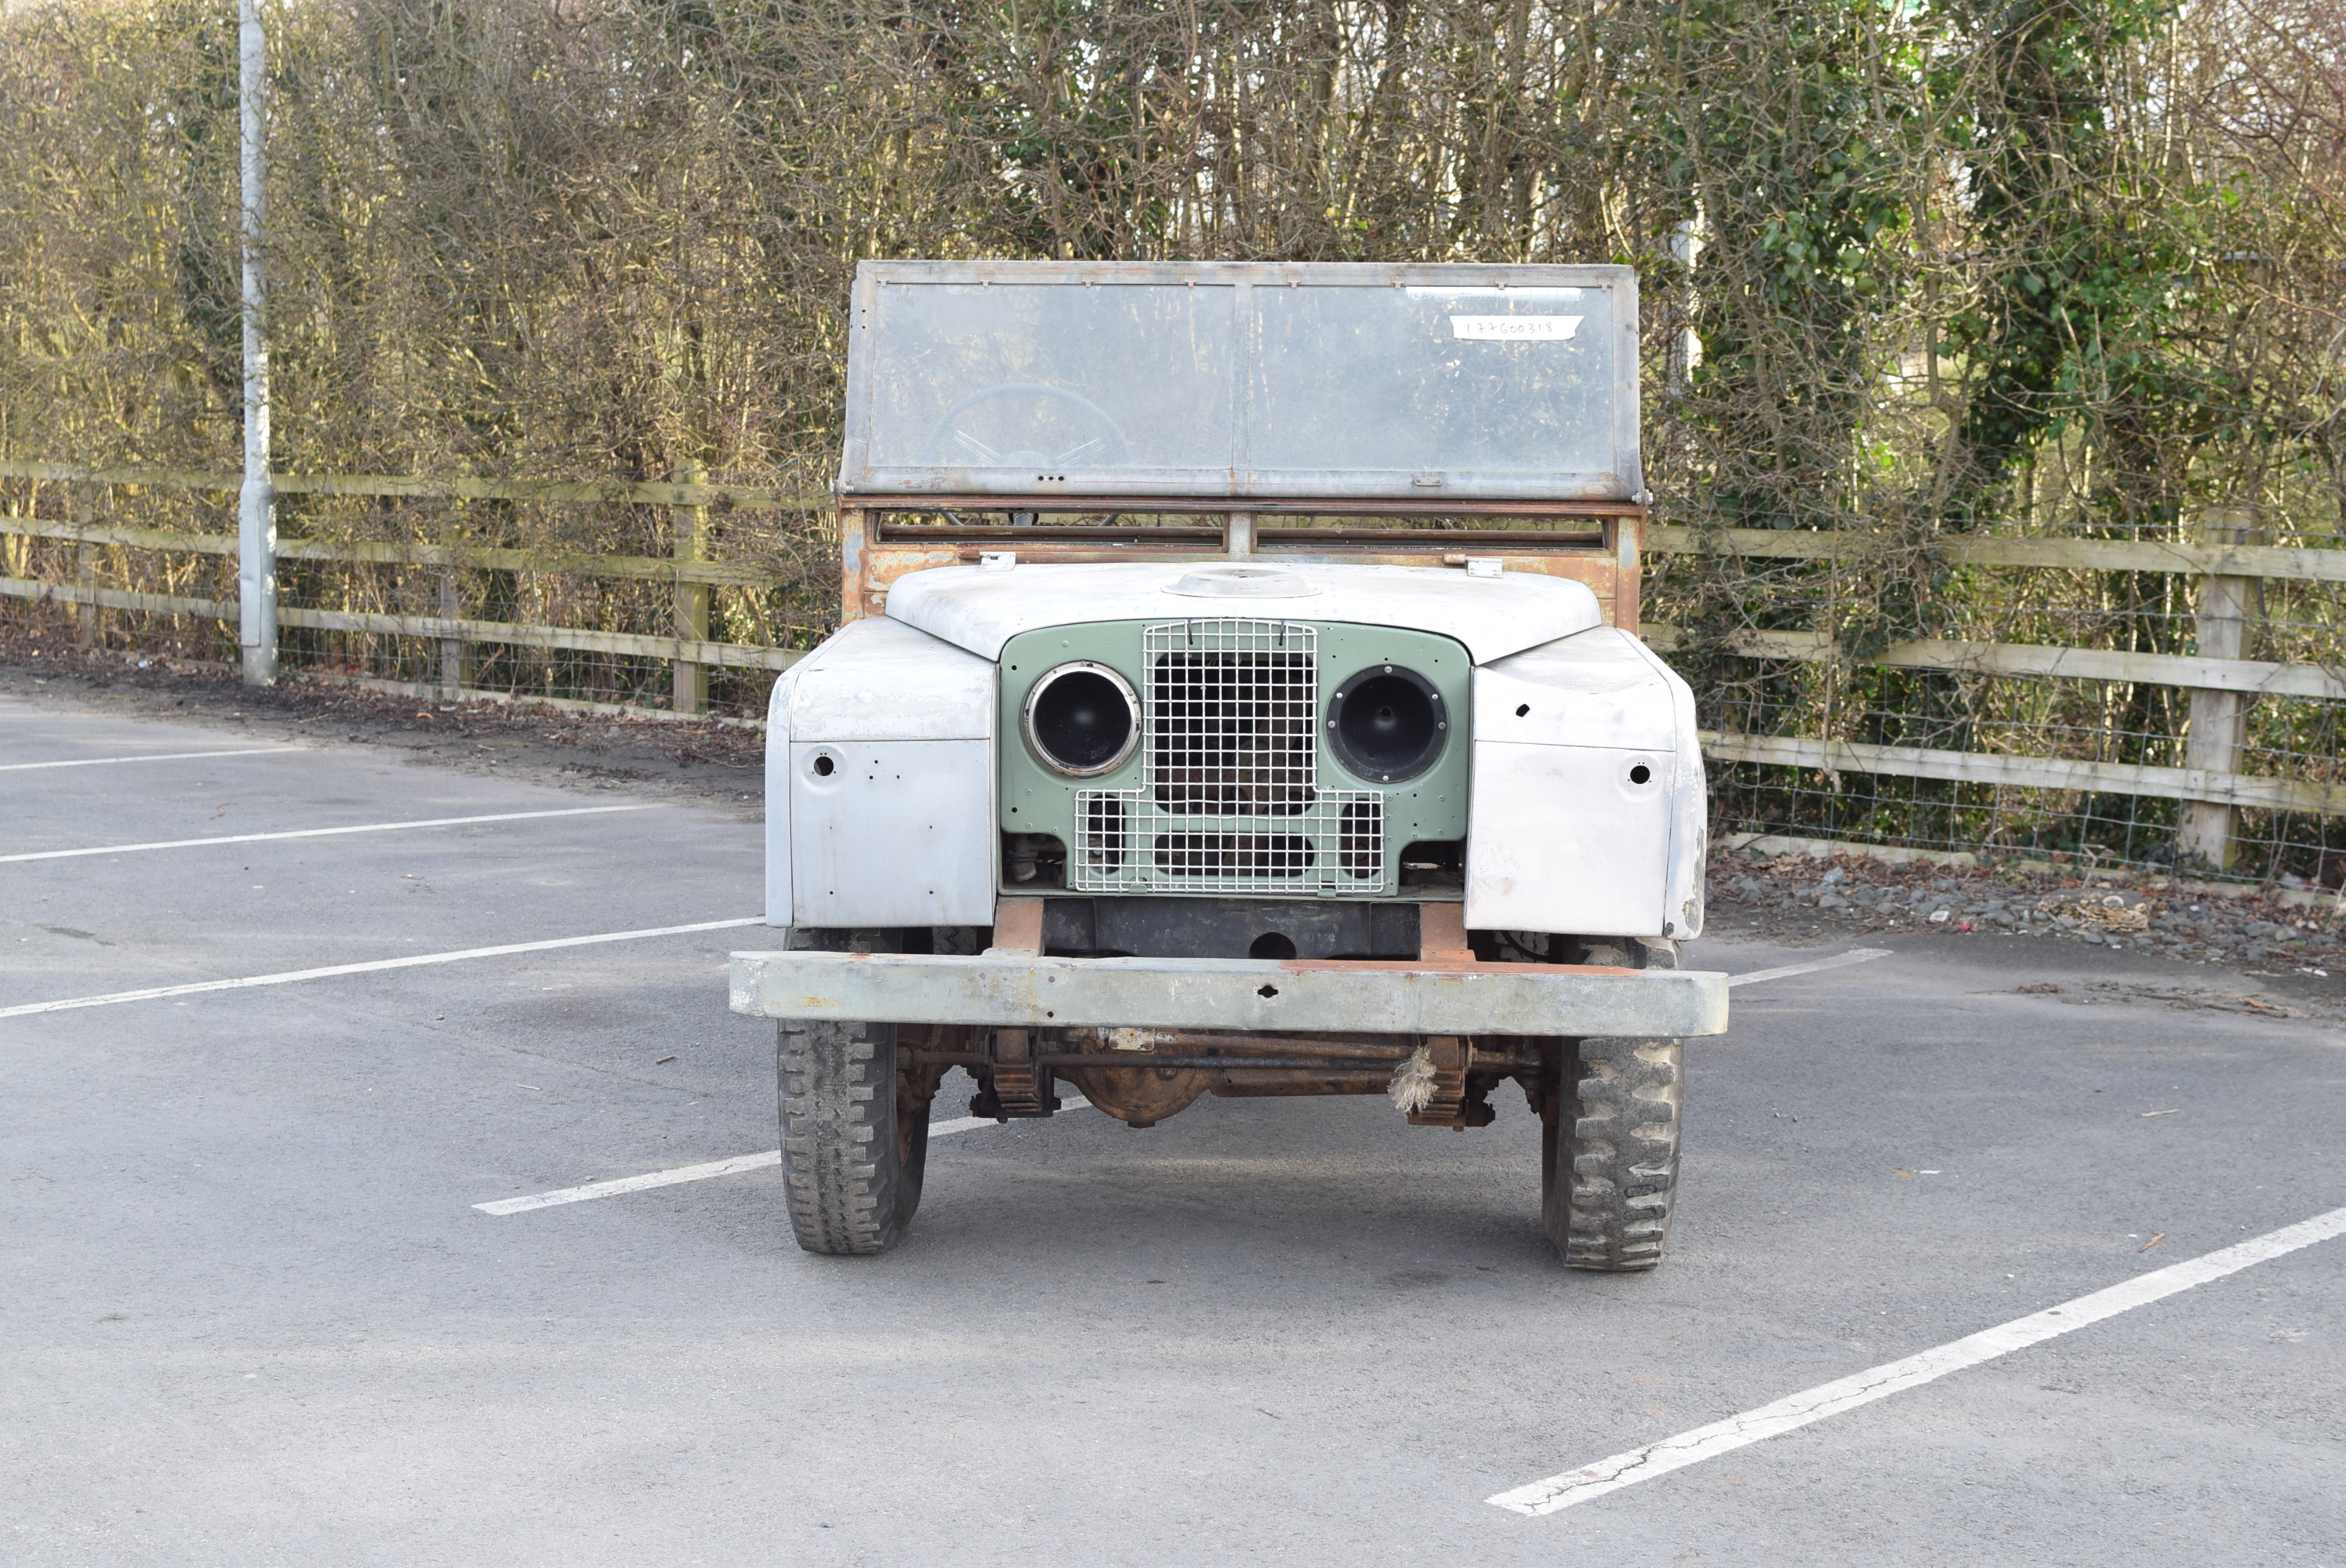 Land Rover Series I 86